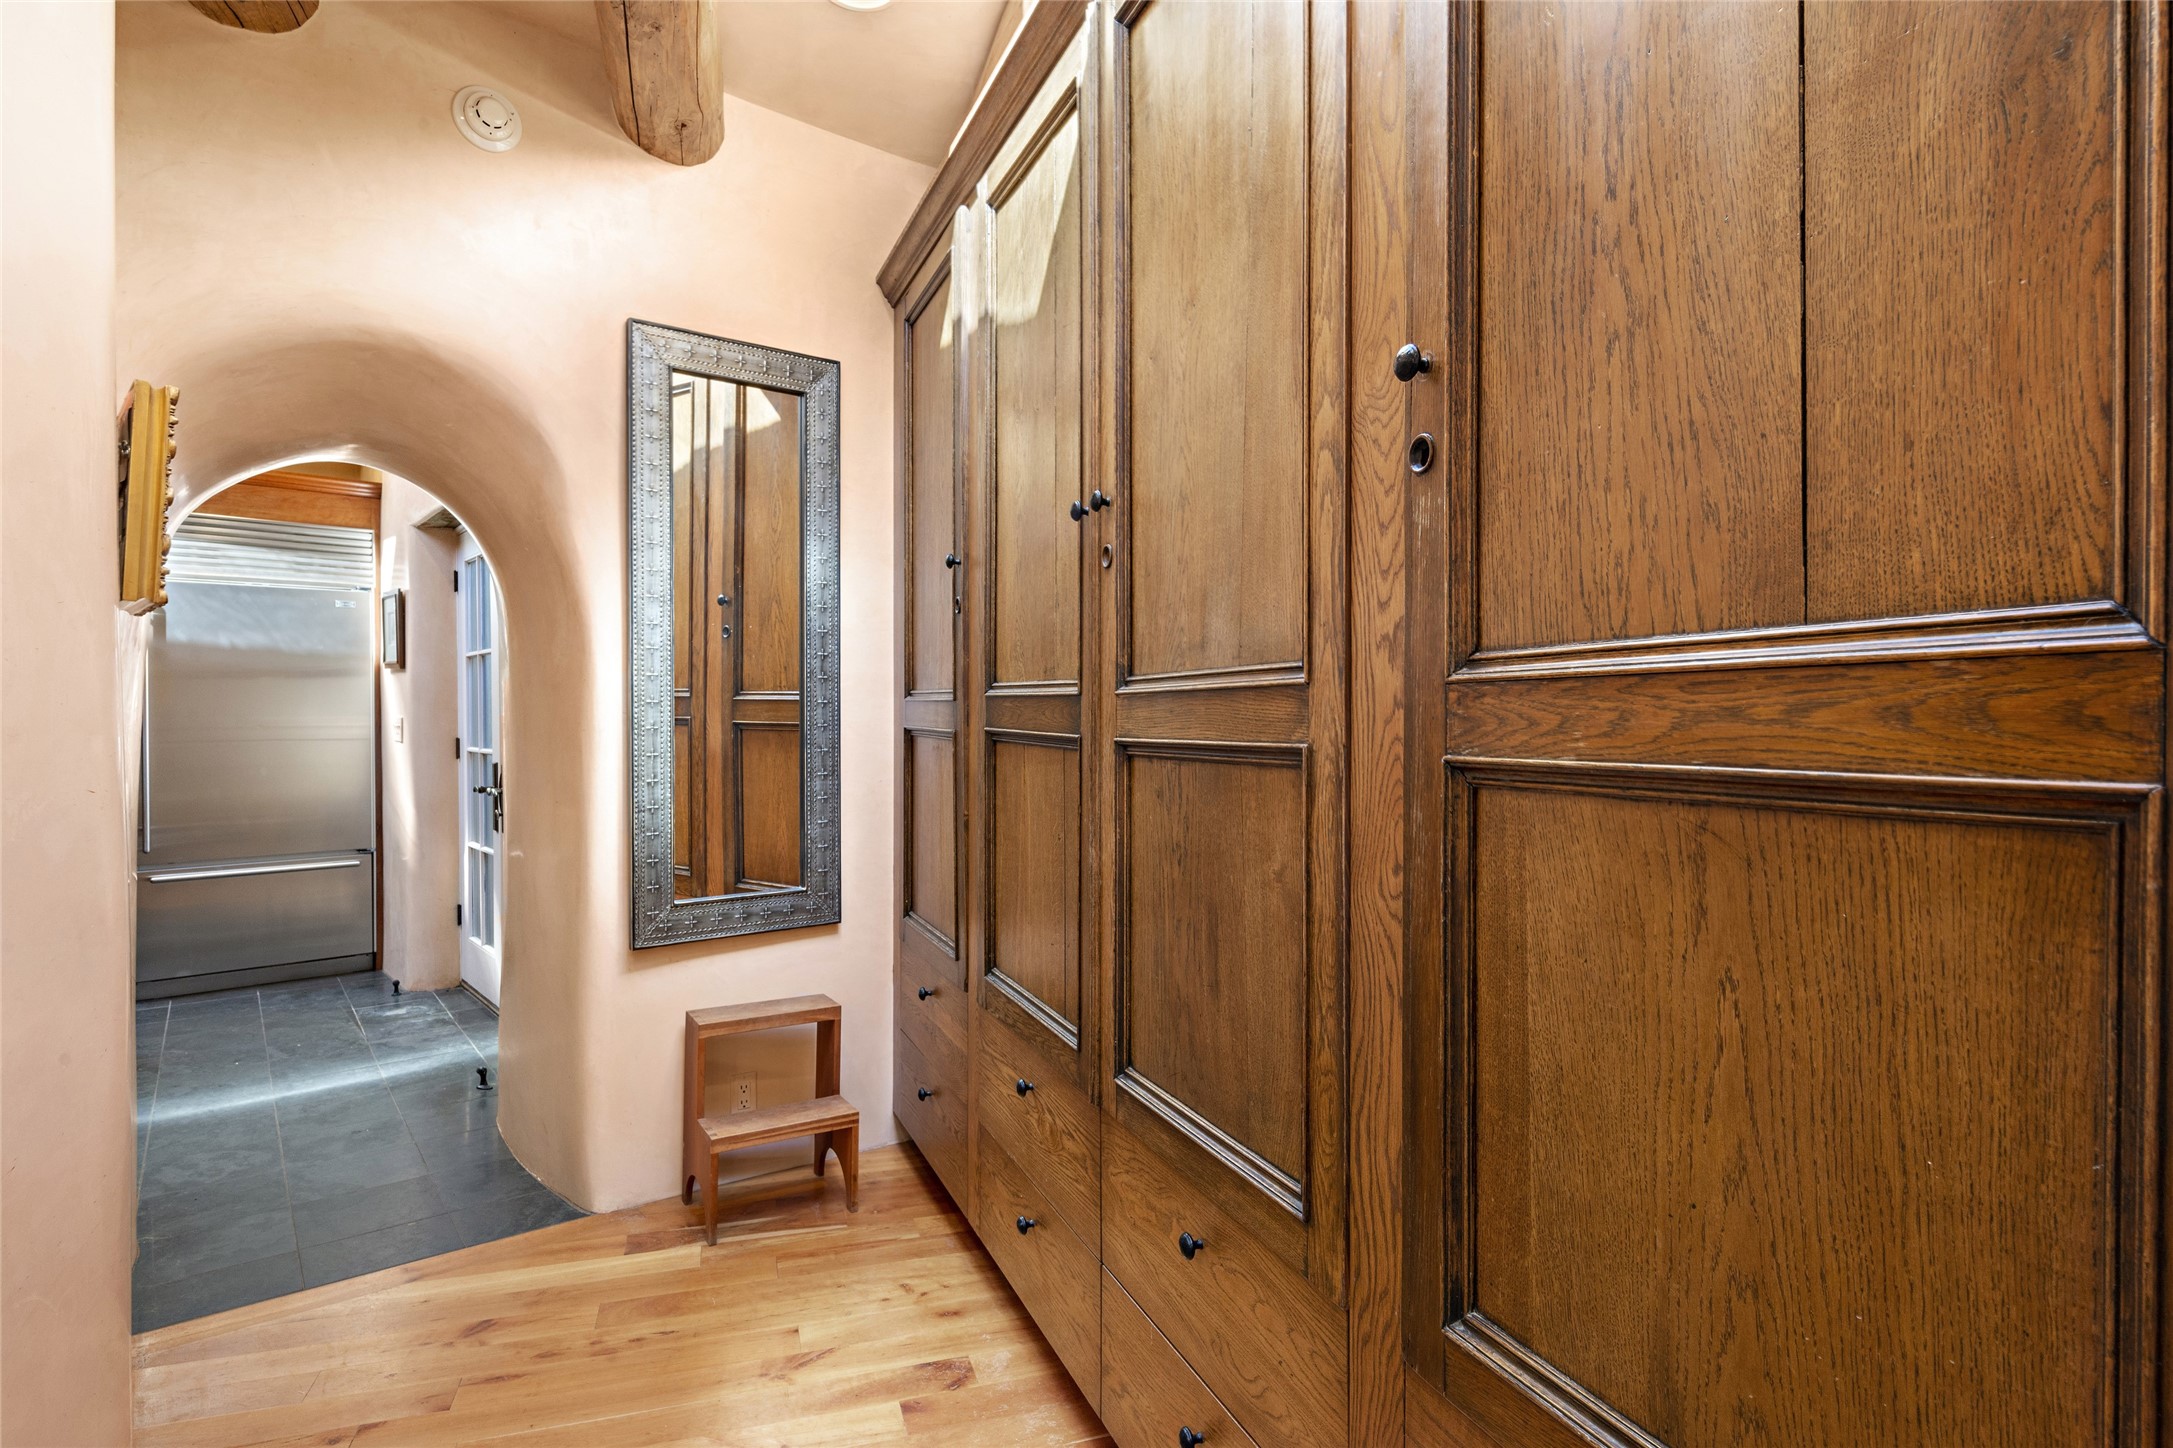 1003 & 1005 Canyon Road, Santa Fe, New Mexico 87501, 6 Bedrooms Bedrooms, ,6 BathroomsBathrooms,Residential,For Sale,1003 & 1005 Canyon Road,202233499